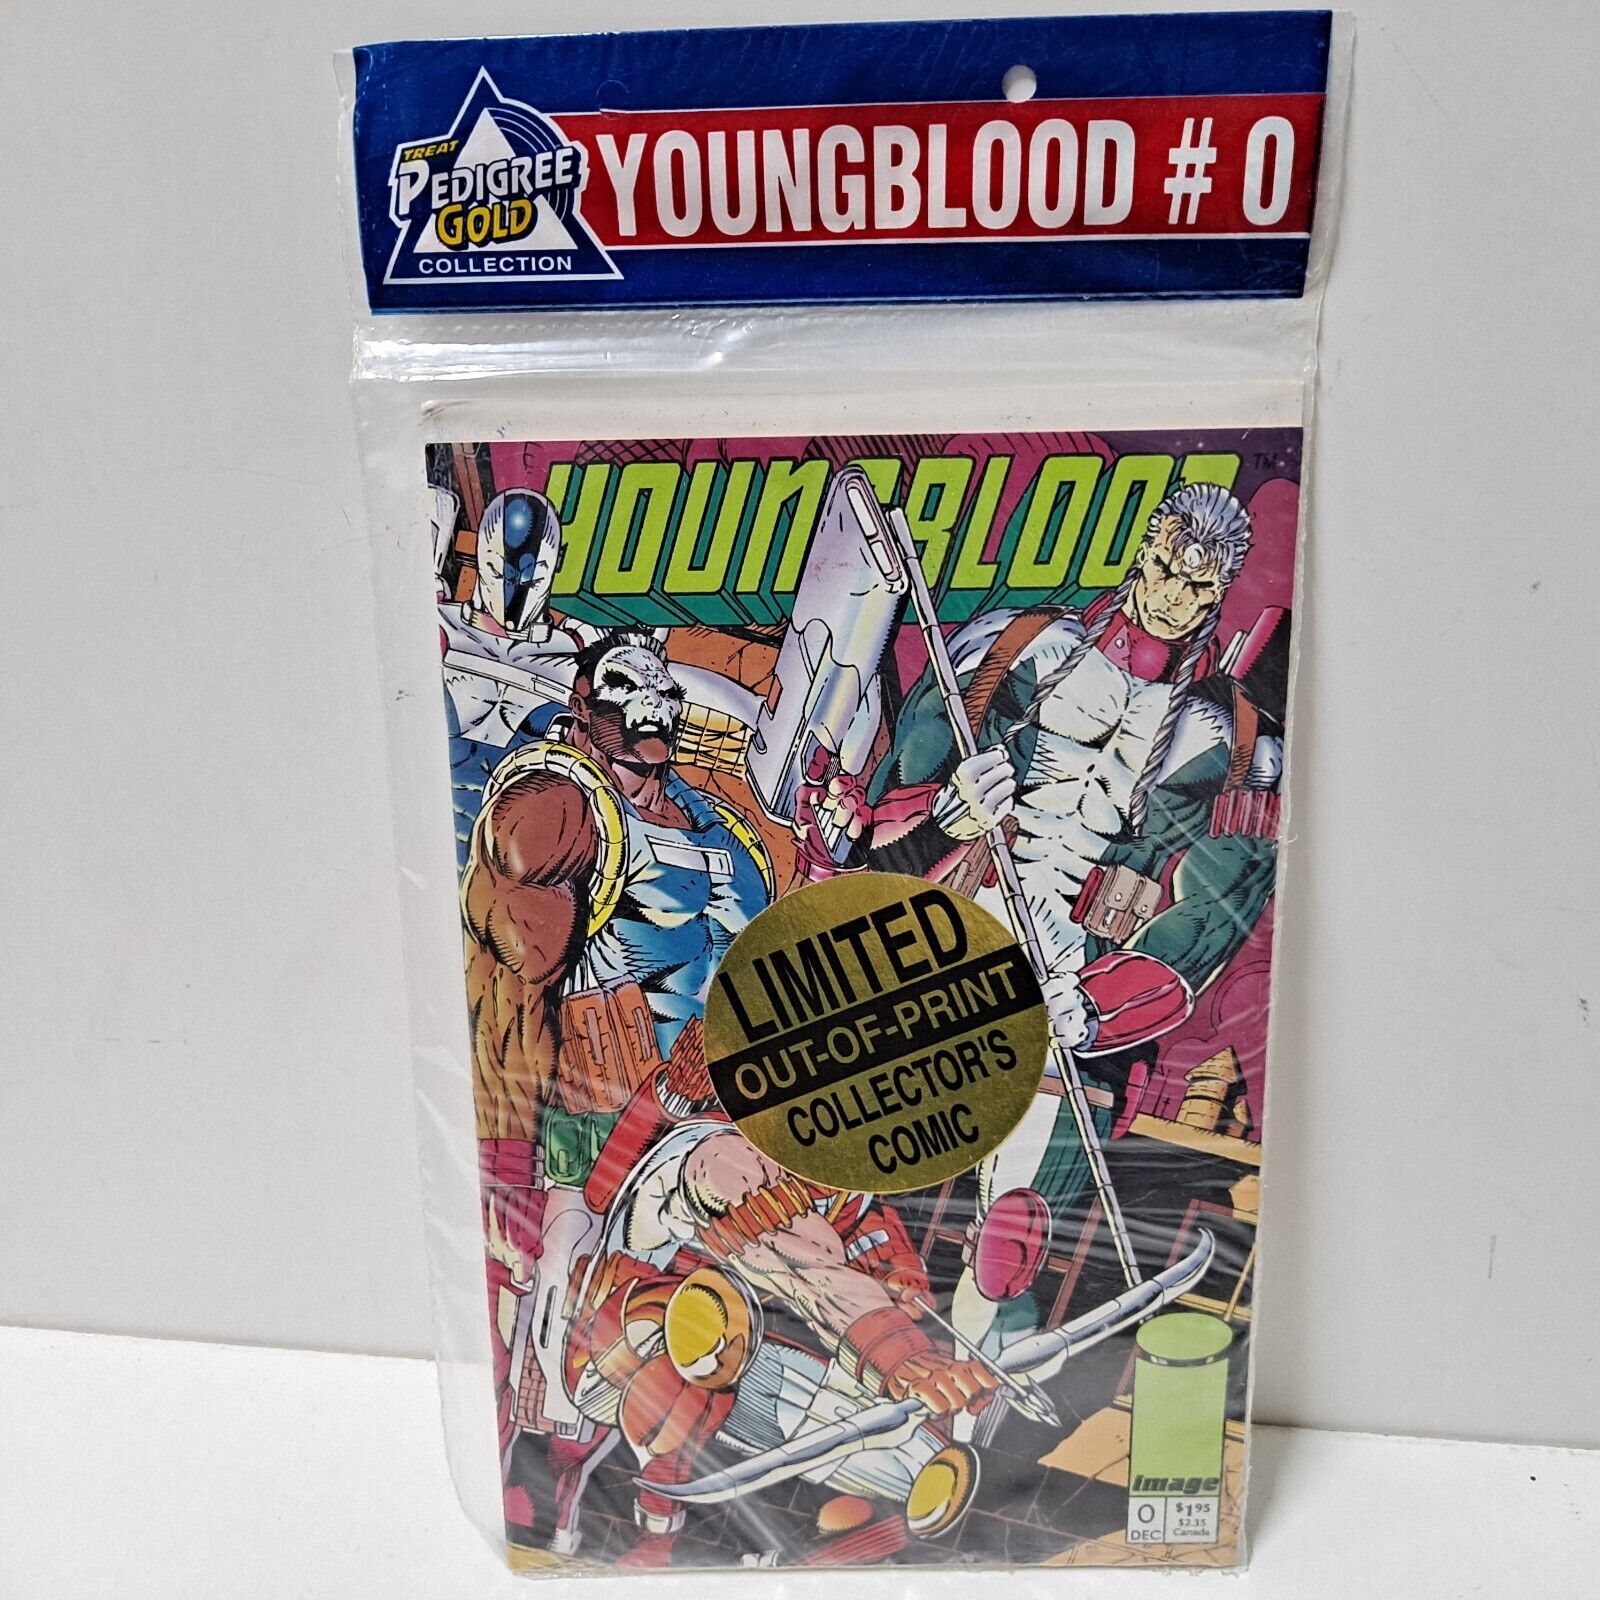 Pedigree Gold Youngblood #0 Sealed VF/NM Image Comics HTF Light Green Letters